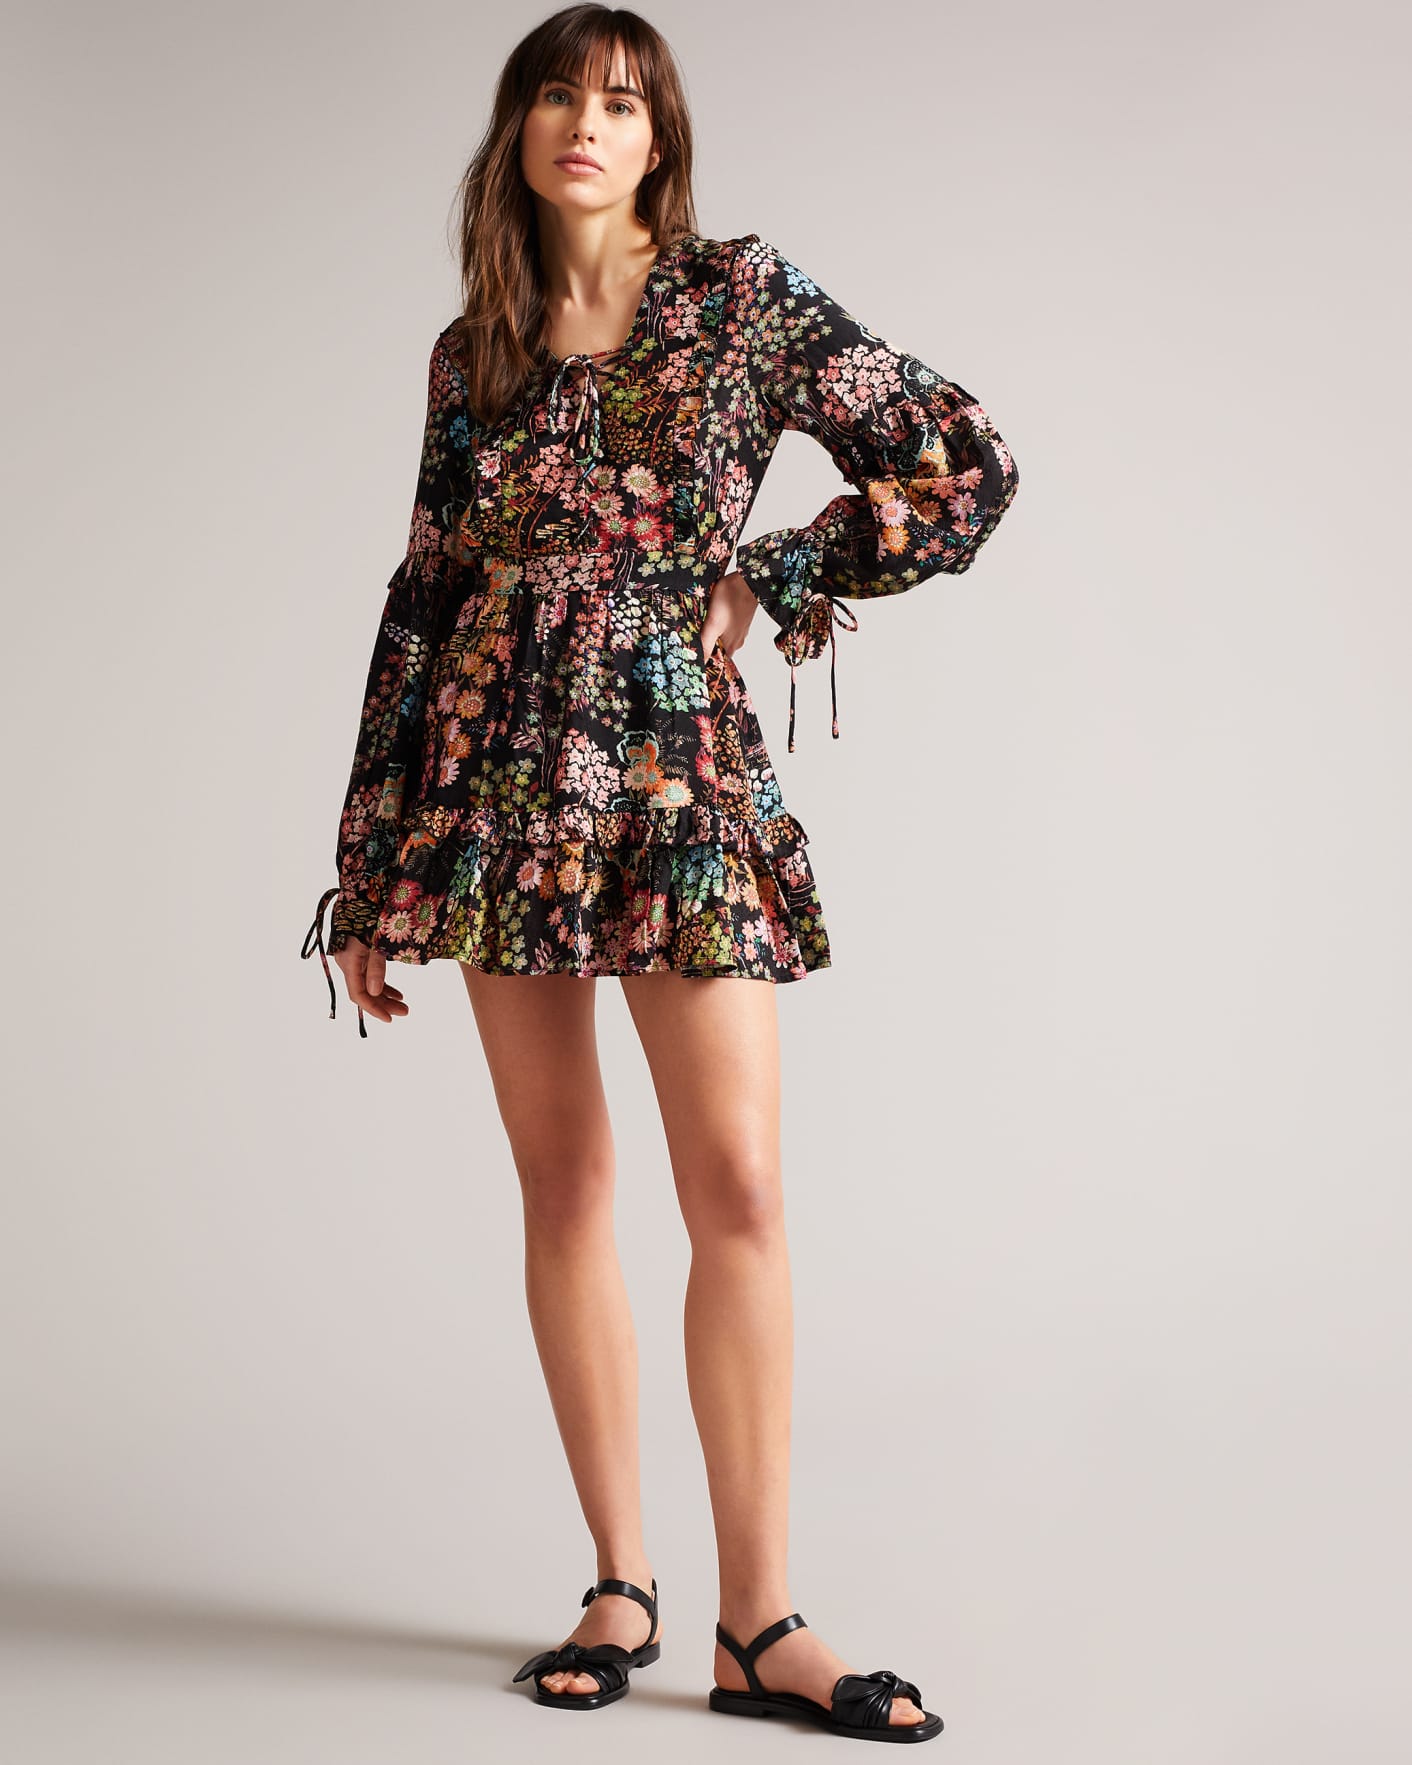 Black Mini Dress With Ruffle Details Ted Baker